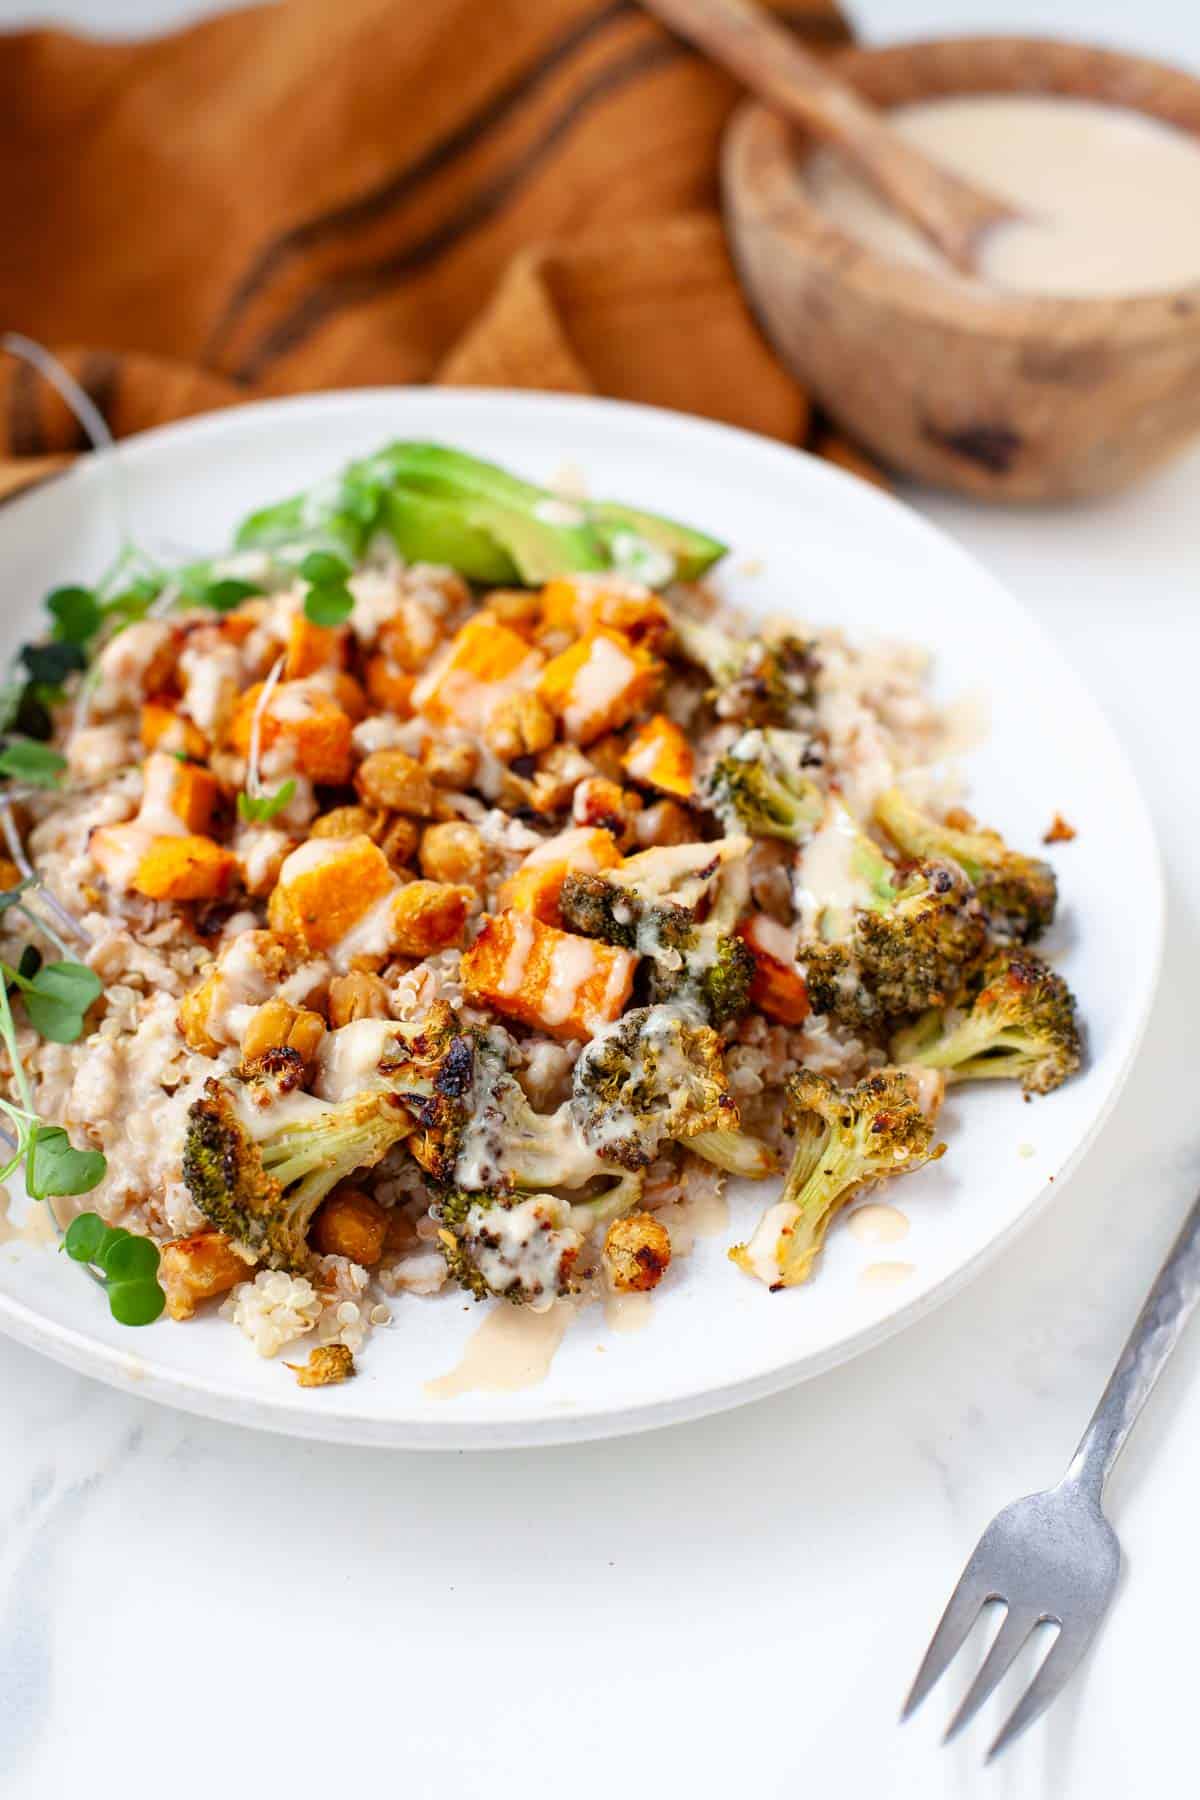 Ancient grains bowl with quinoa, farro, sweet potato, chickpeas, broccoli and avocado served in white bowl and drizzled with tahini sauce.